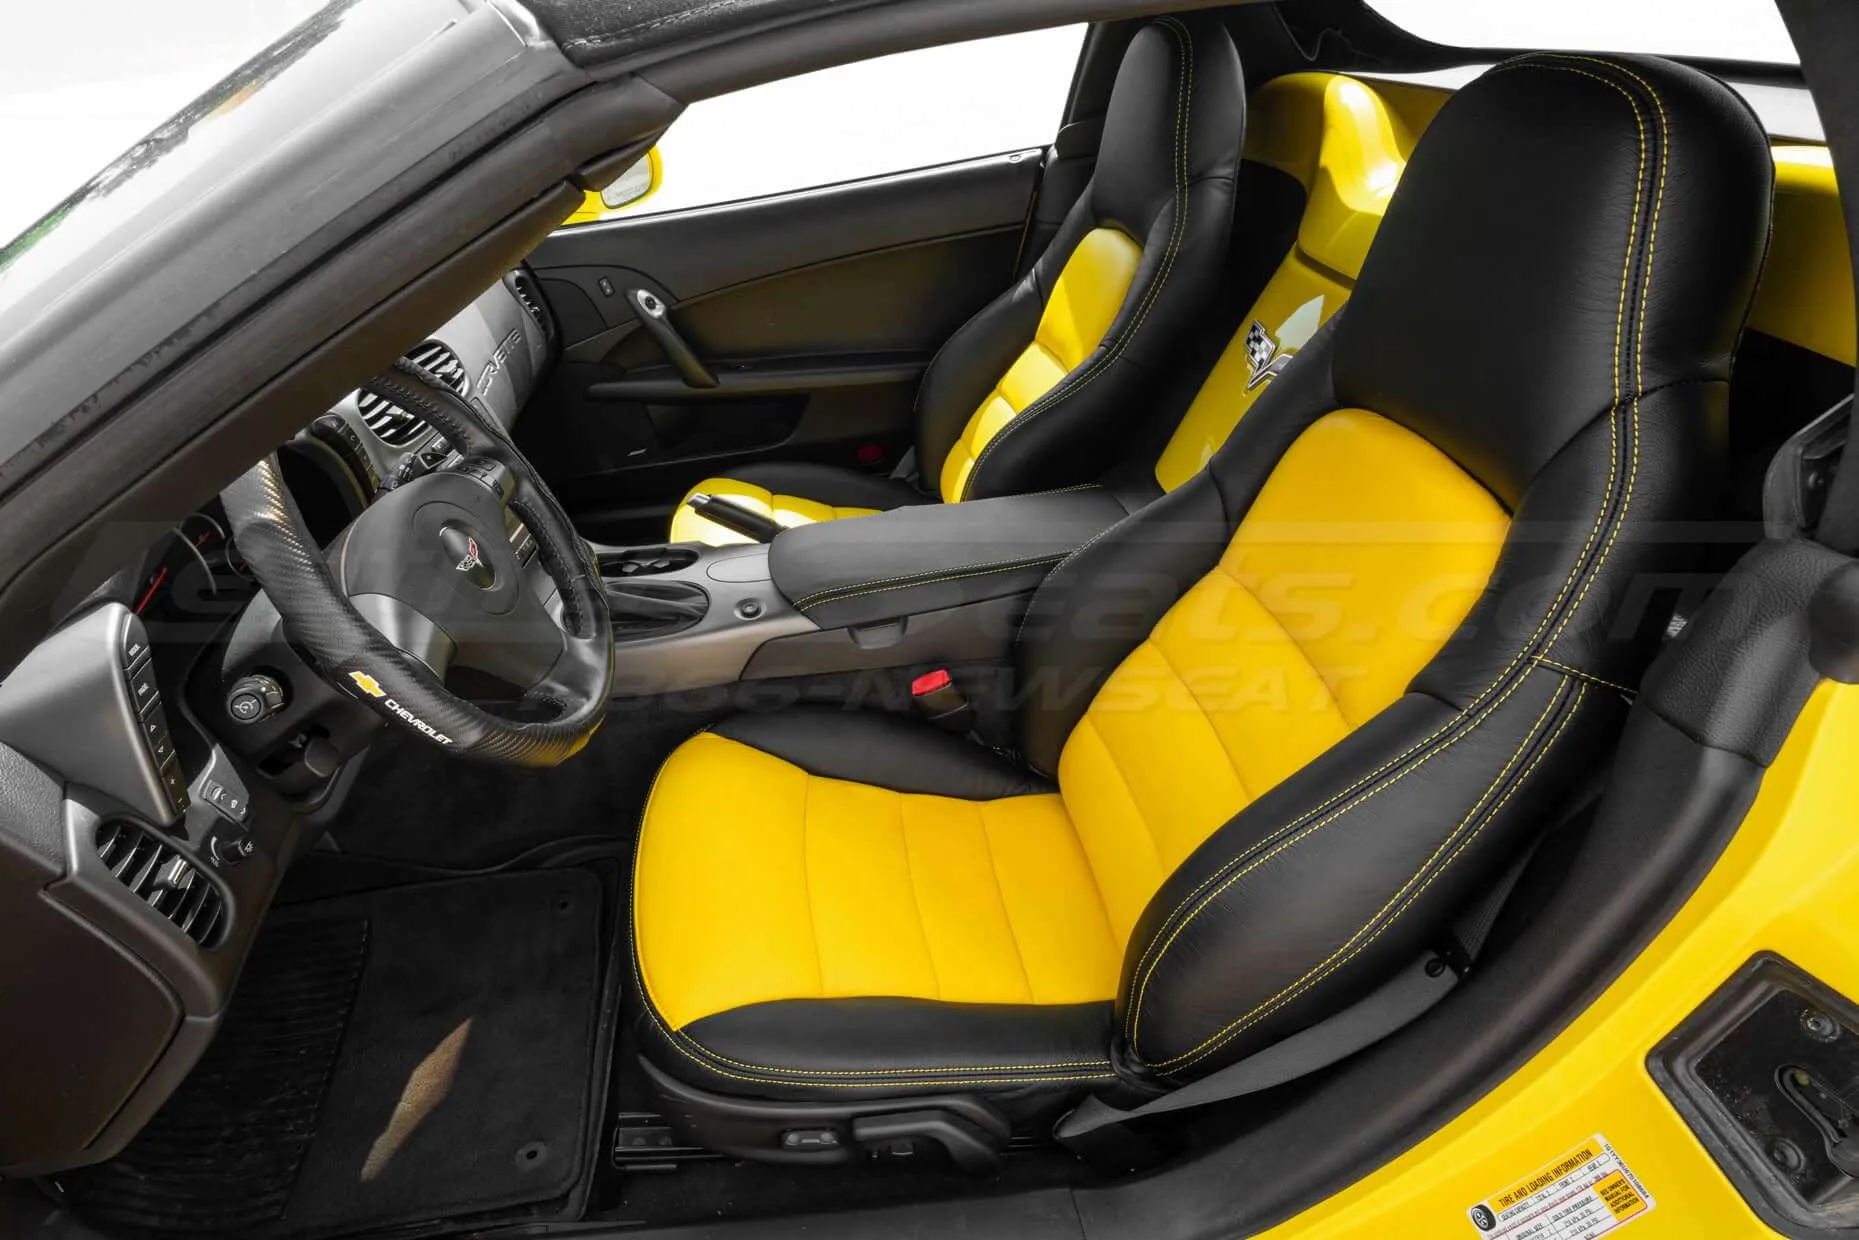 05-11 Black and Yellow C6 Corvette leather seats installed